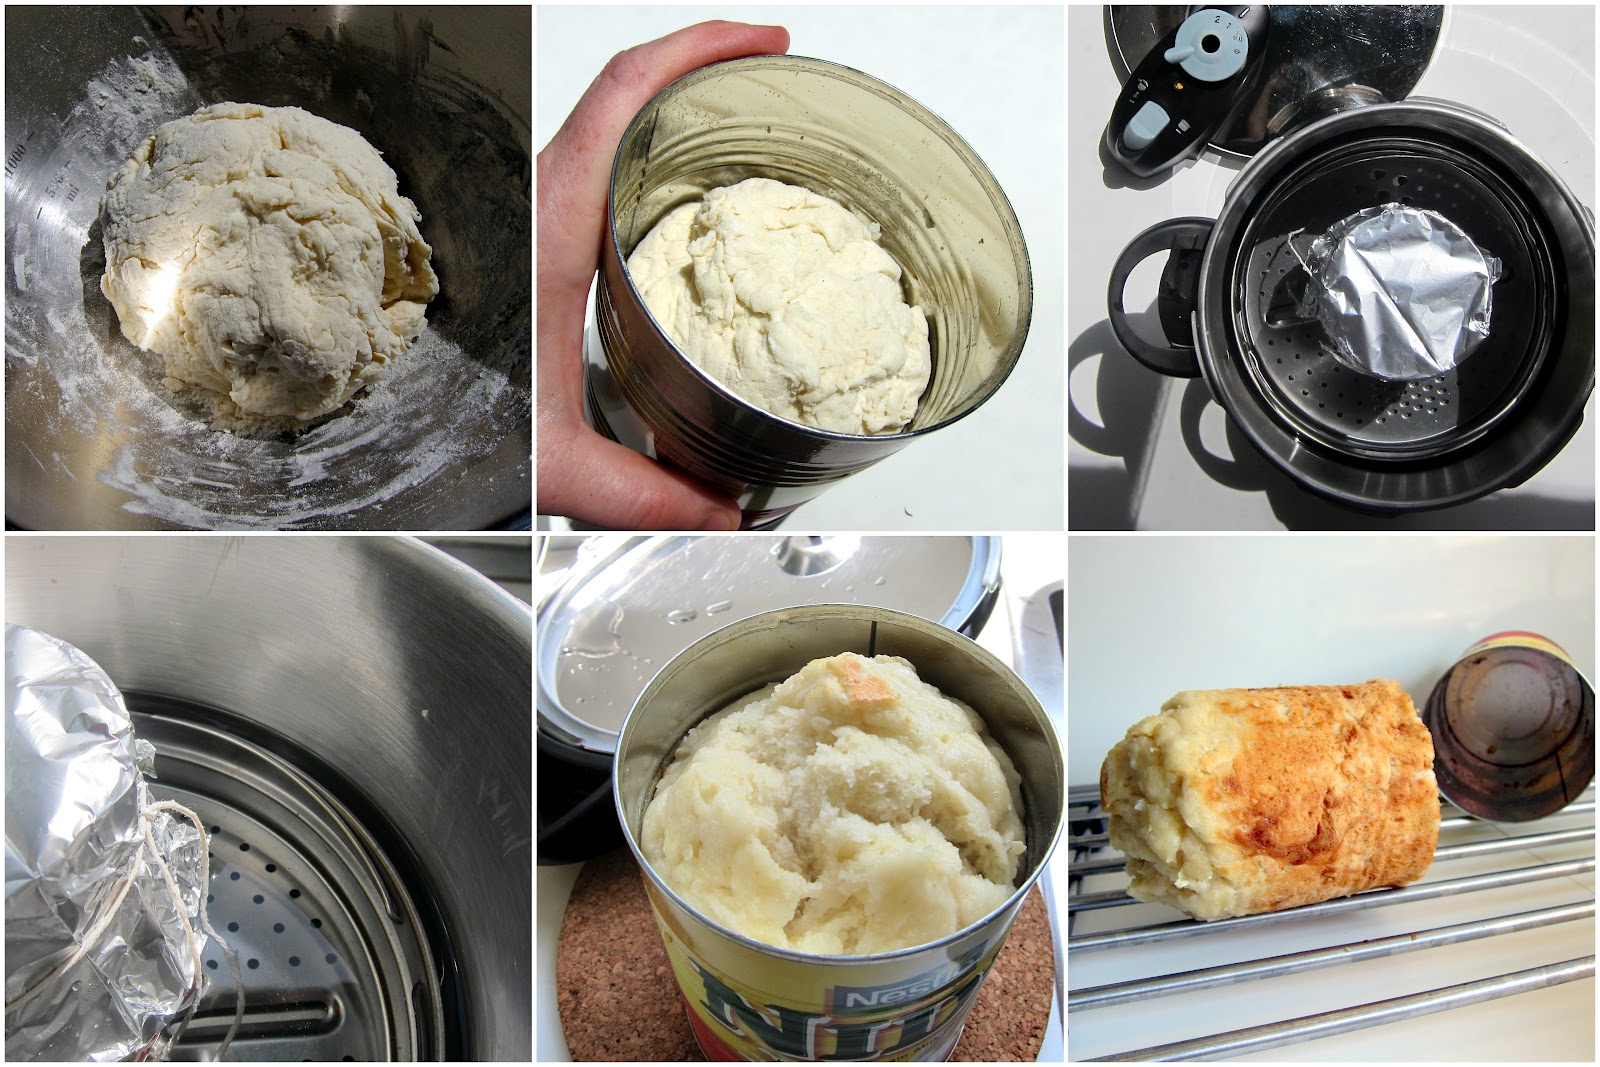 Frieda Loves Bread: Electric Pressure Cooking: Step One ~ Getting to Know  Your Cooker